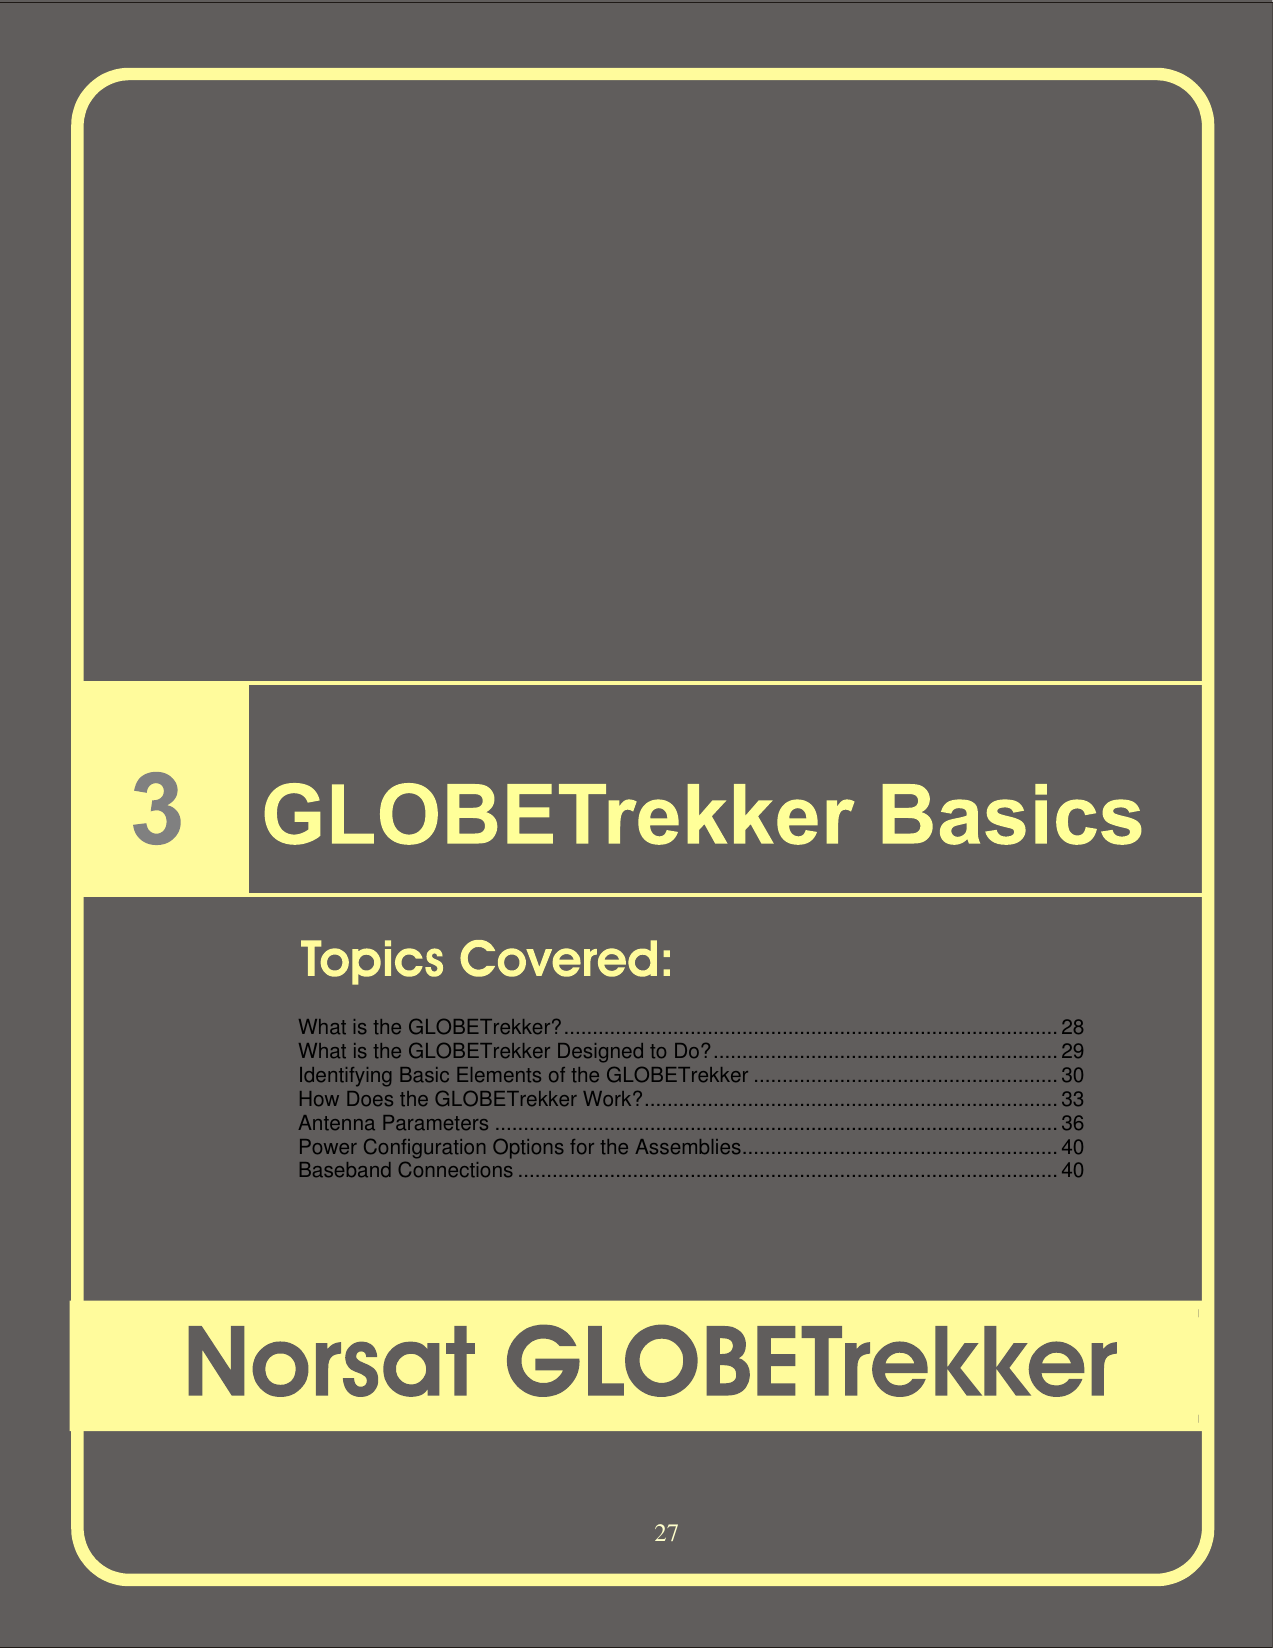   27                          What is the GLOBETrekker?......................................................................................28 What is the GLOBETrekker Designed to Do?............................................................29 Identifying Basic Elements of the GLOBETrekker.....................................................30 How Does the GLOBETrekker Work?........................................................................33 Antenna Parameters..................................................................................................36 Power Configuration Options for the Assemblies.......................................................40 Baseband Connections..............................................................................................40    